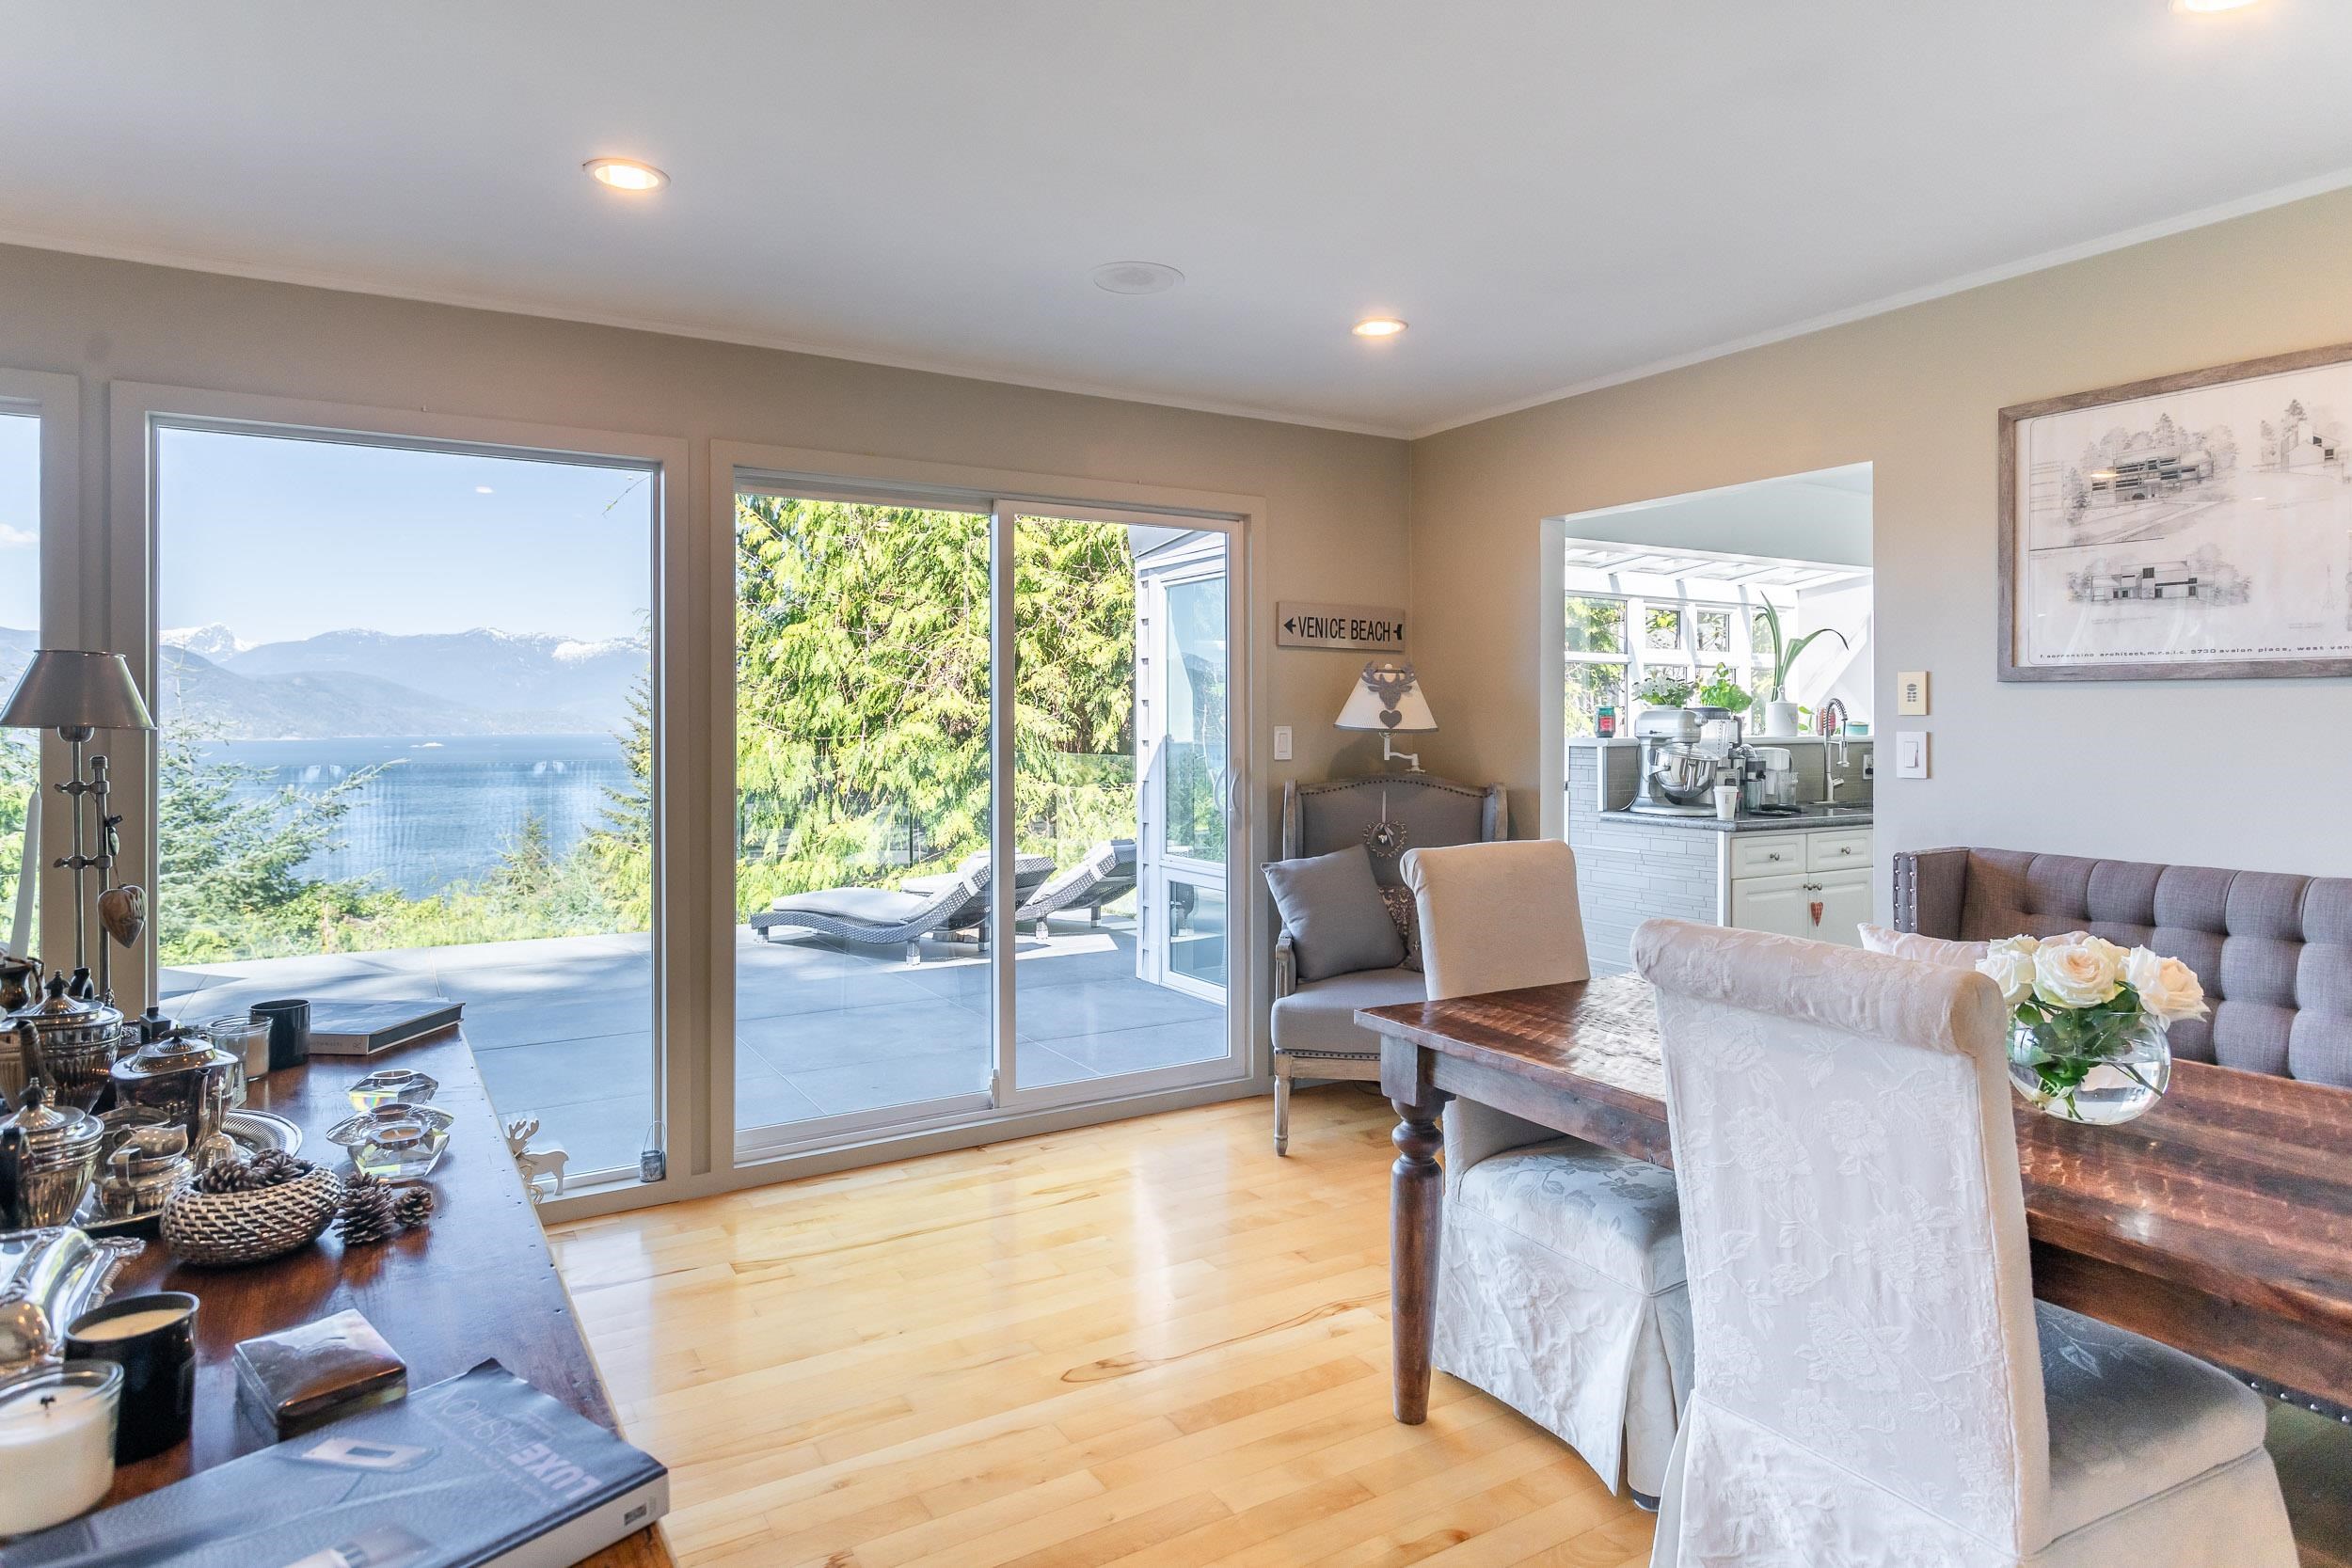 Listing image of 30 OCEANVIEW ROAD